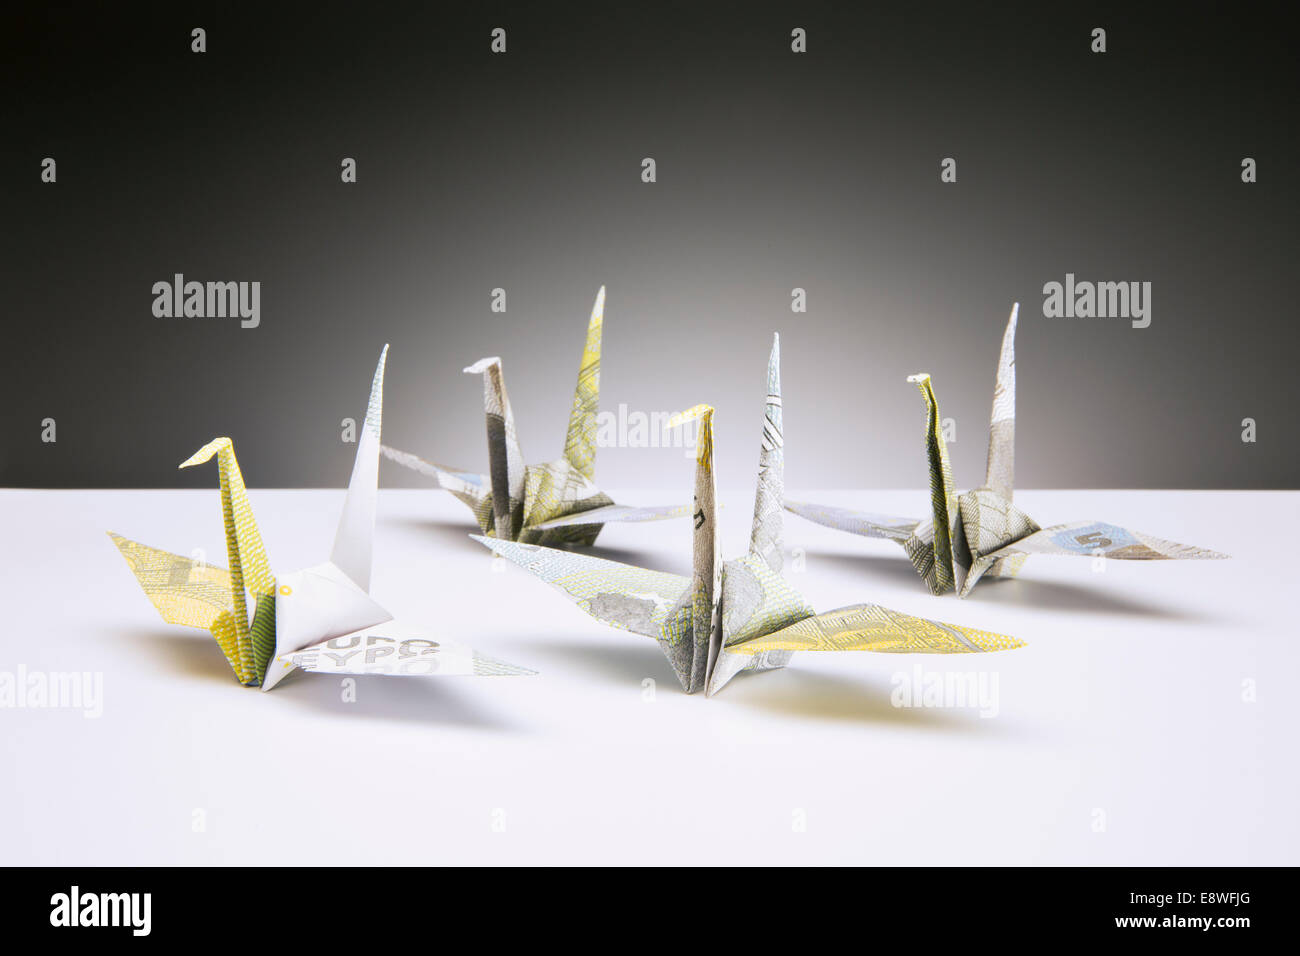 Origami cranes made of Euros on counter Stock Photo